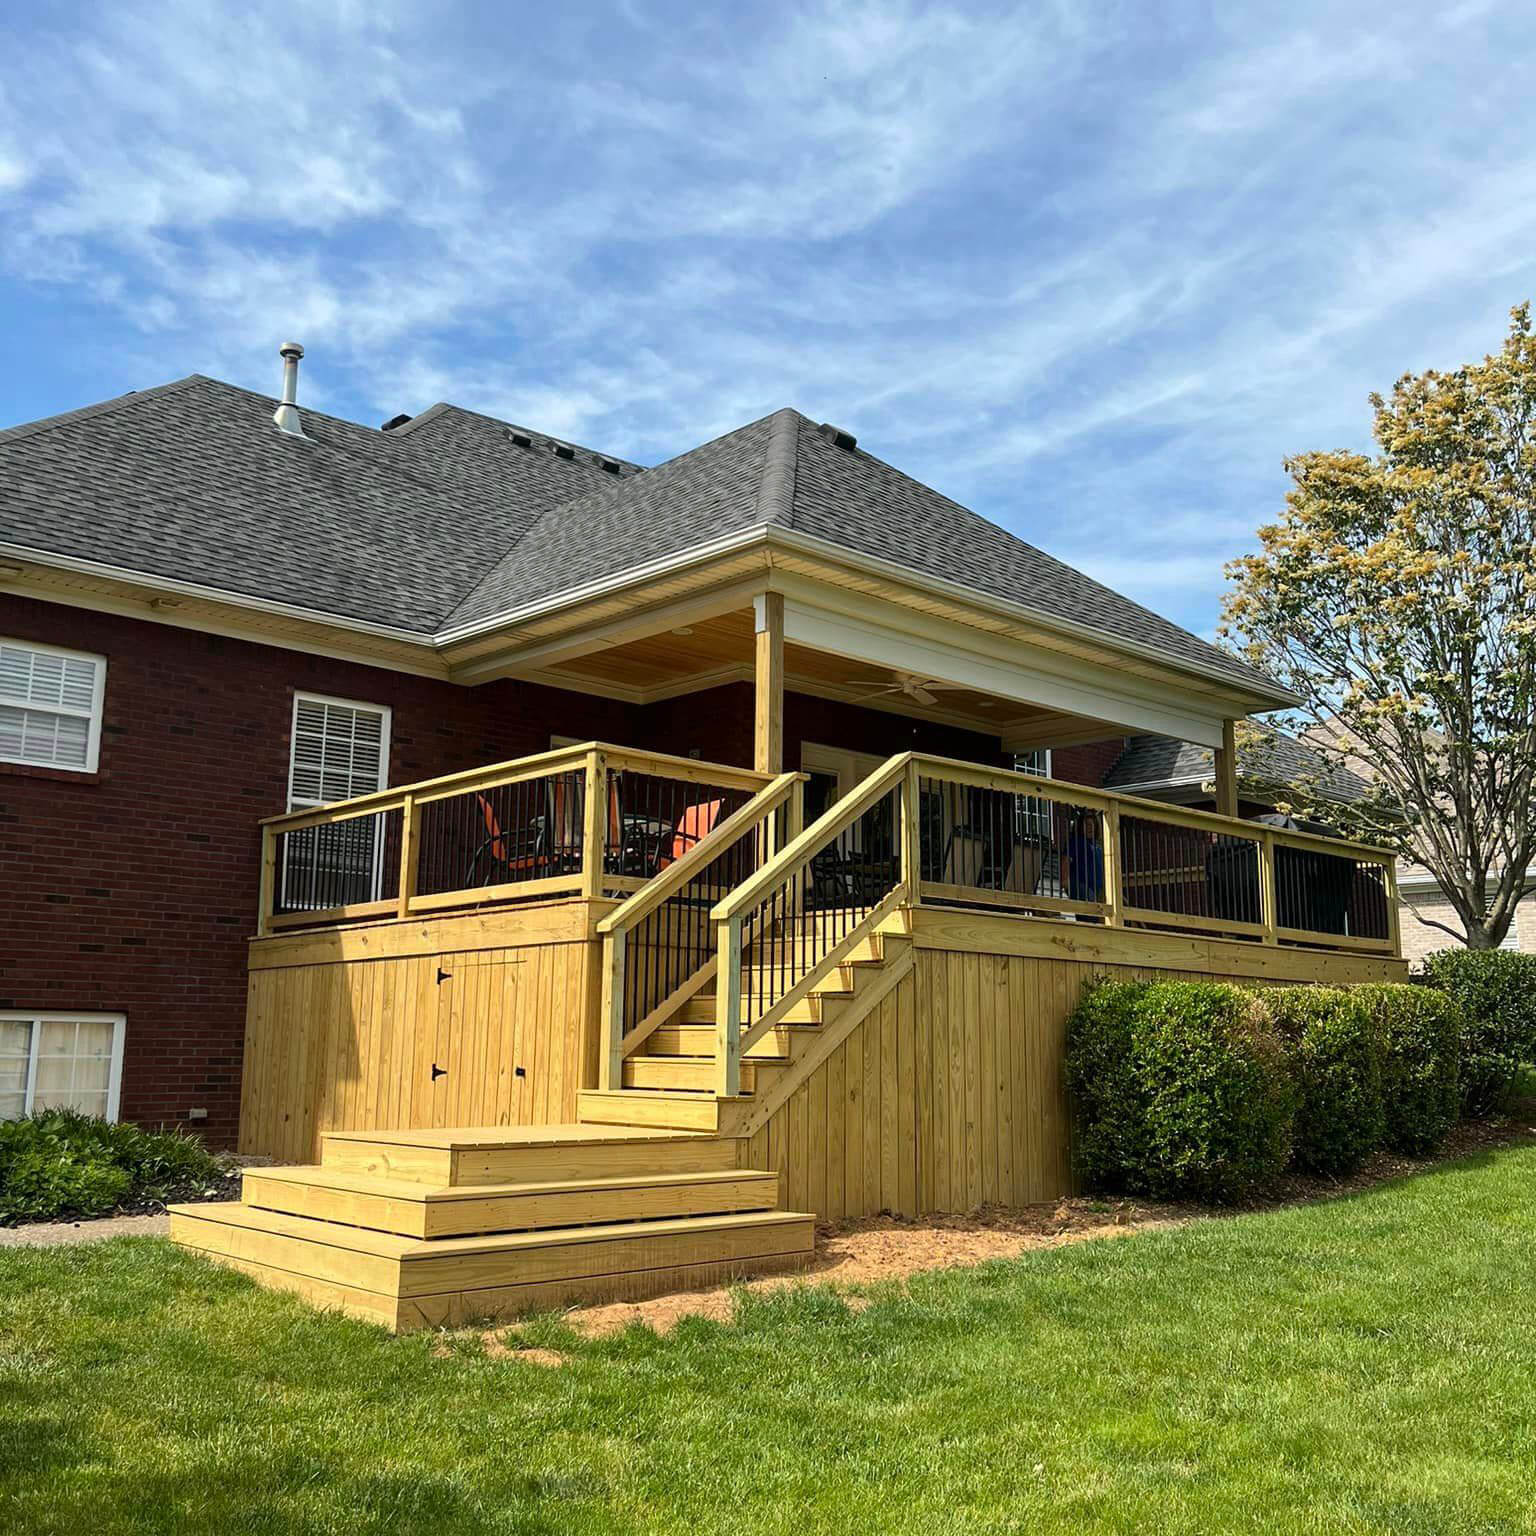 Maximizing Your Deck’s Potential: A Guide to Covered Deck Construction